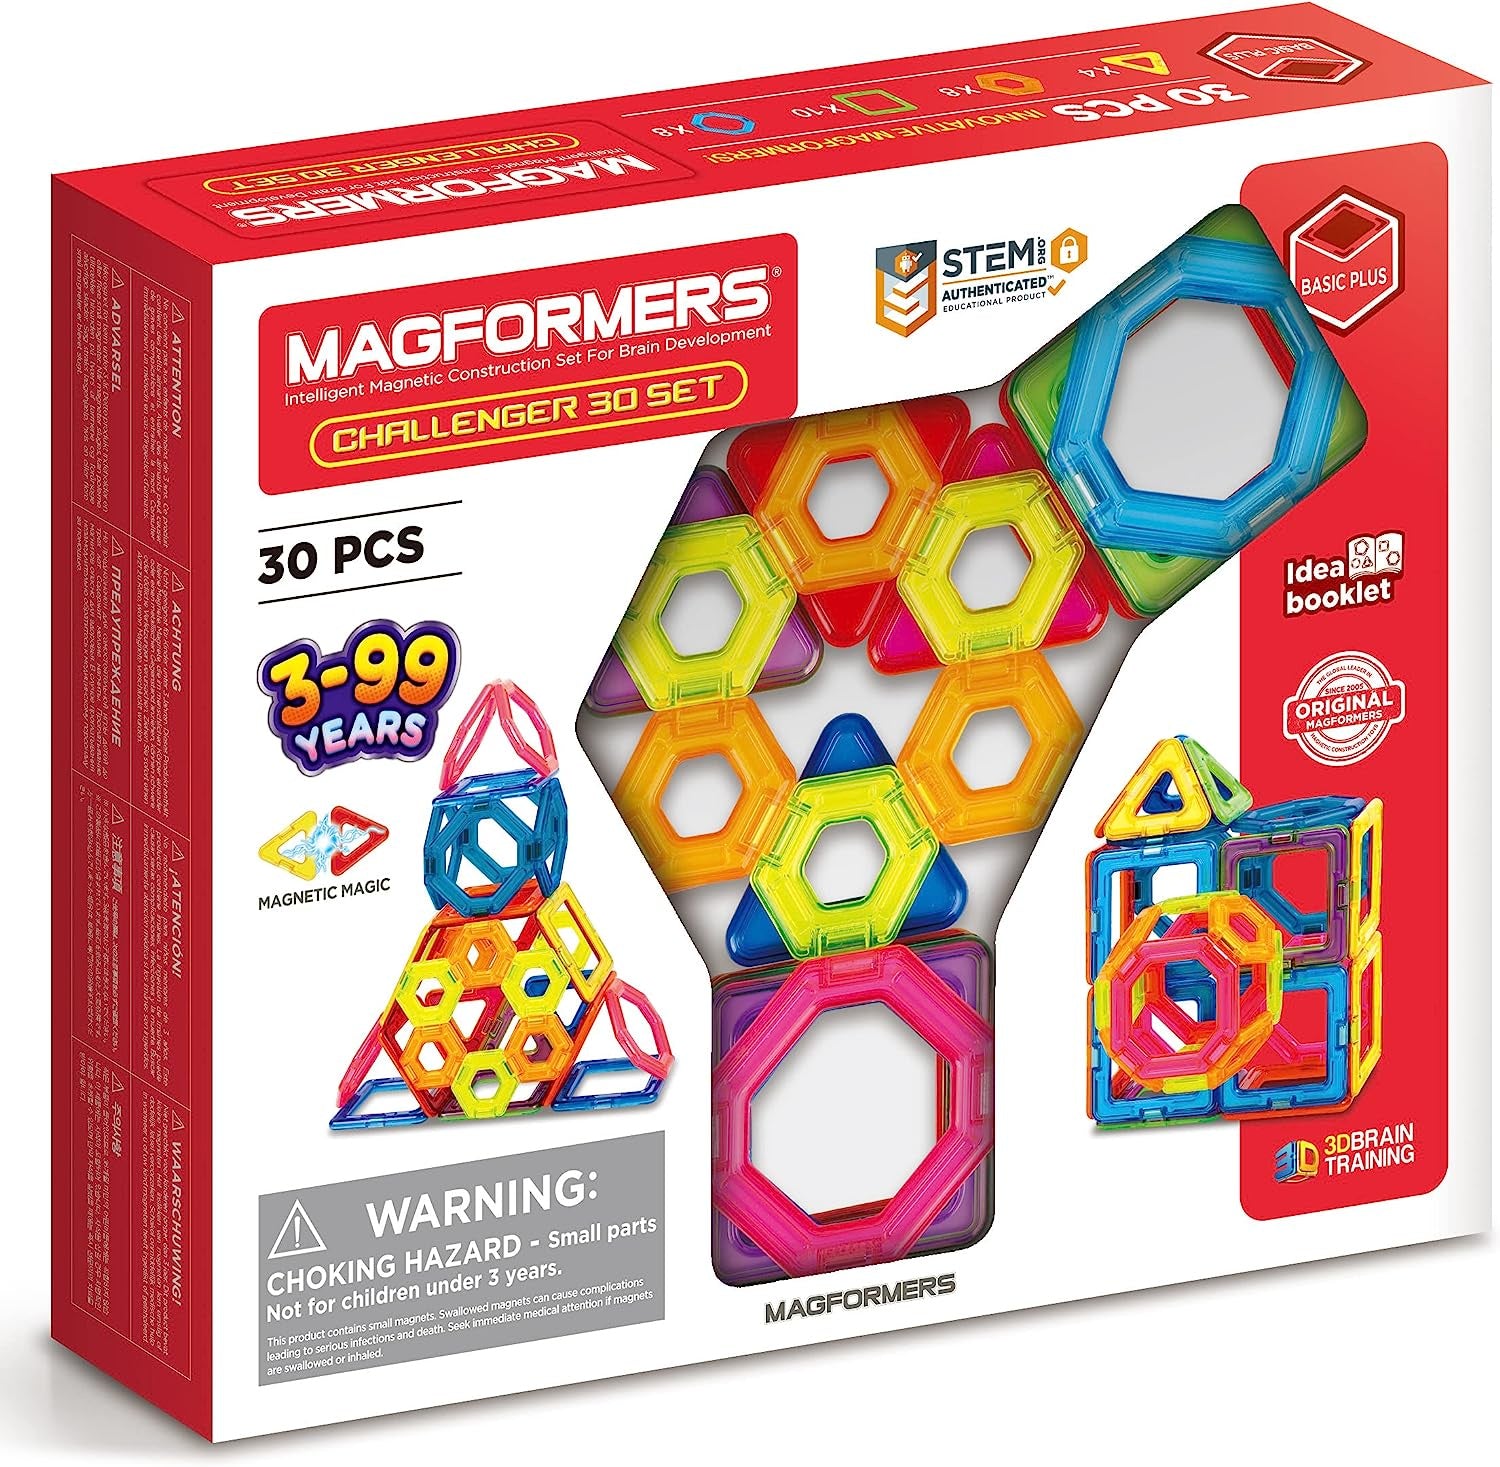 Magformers Challenger 30pc Construction Playset